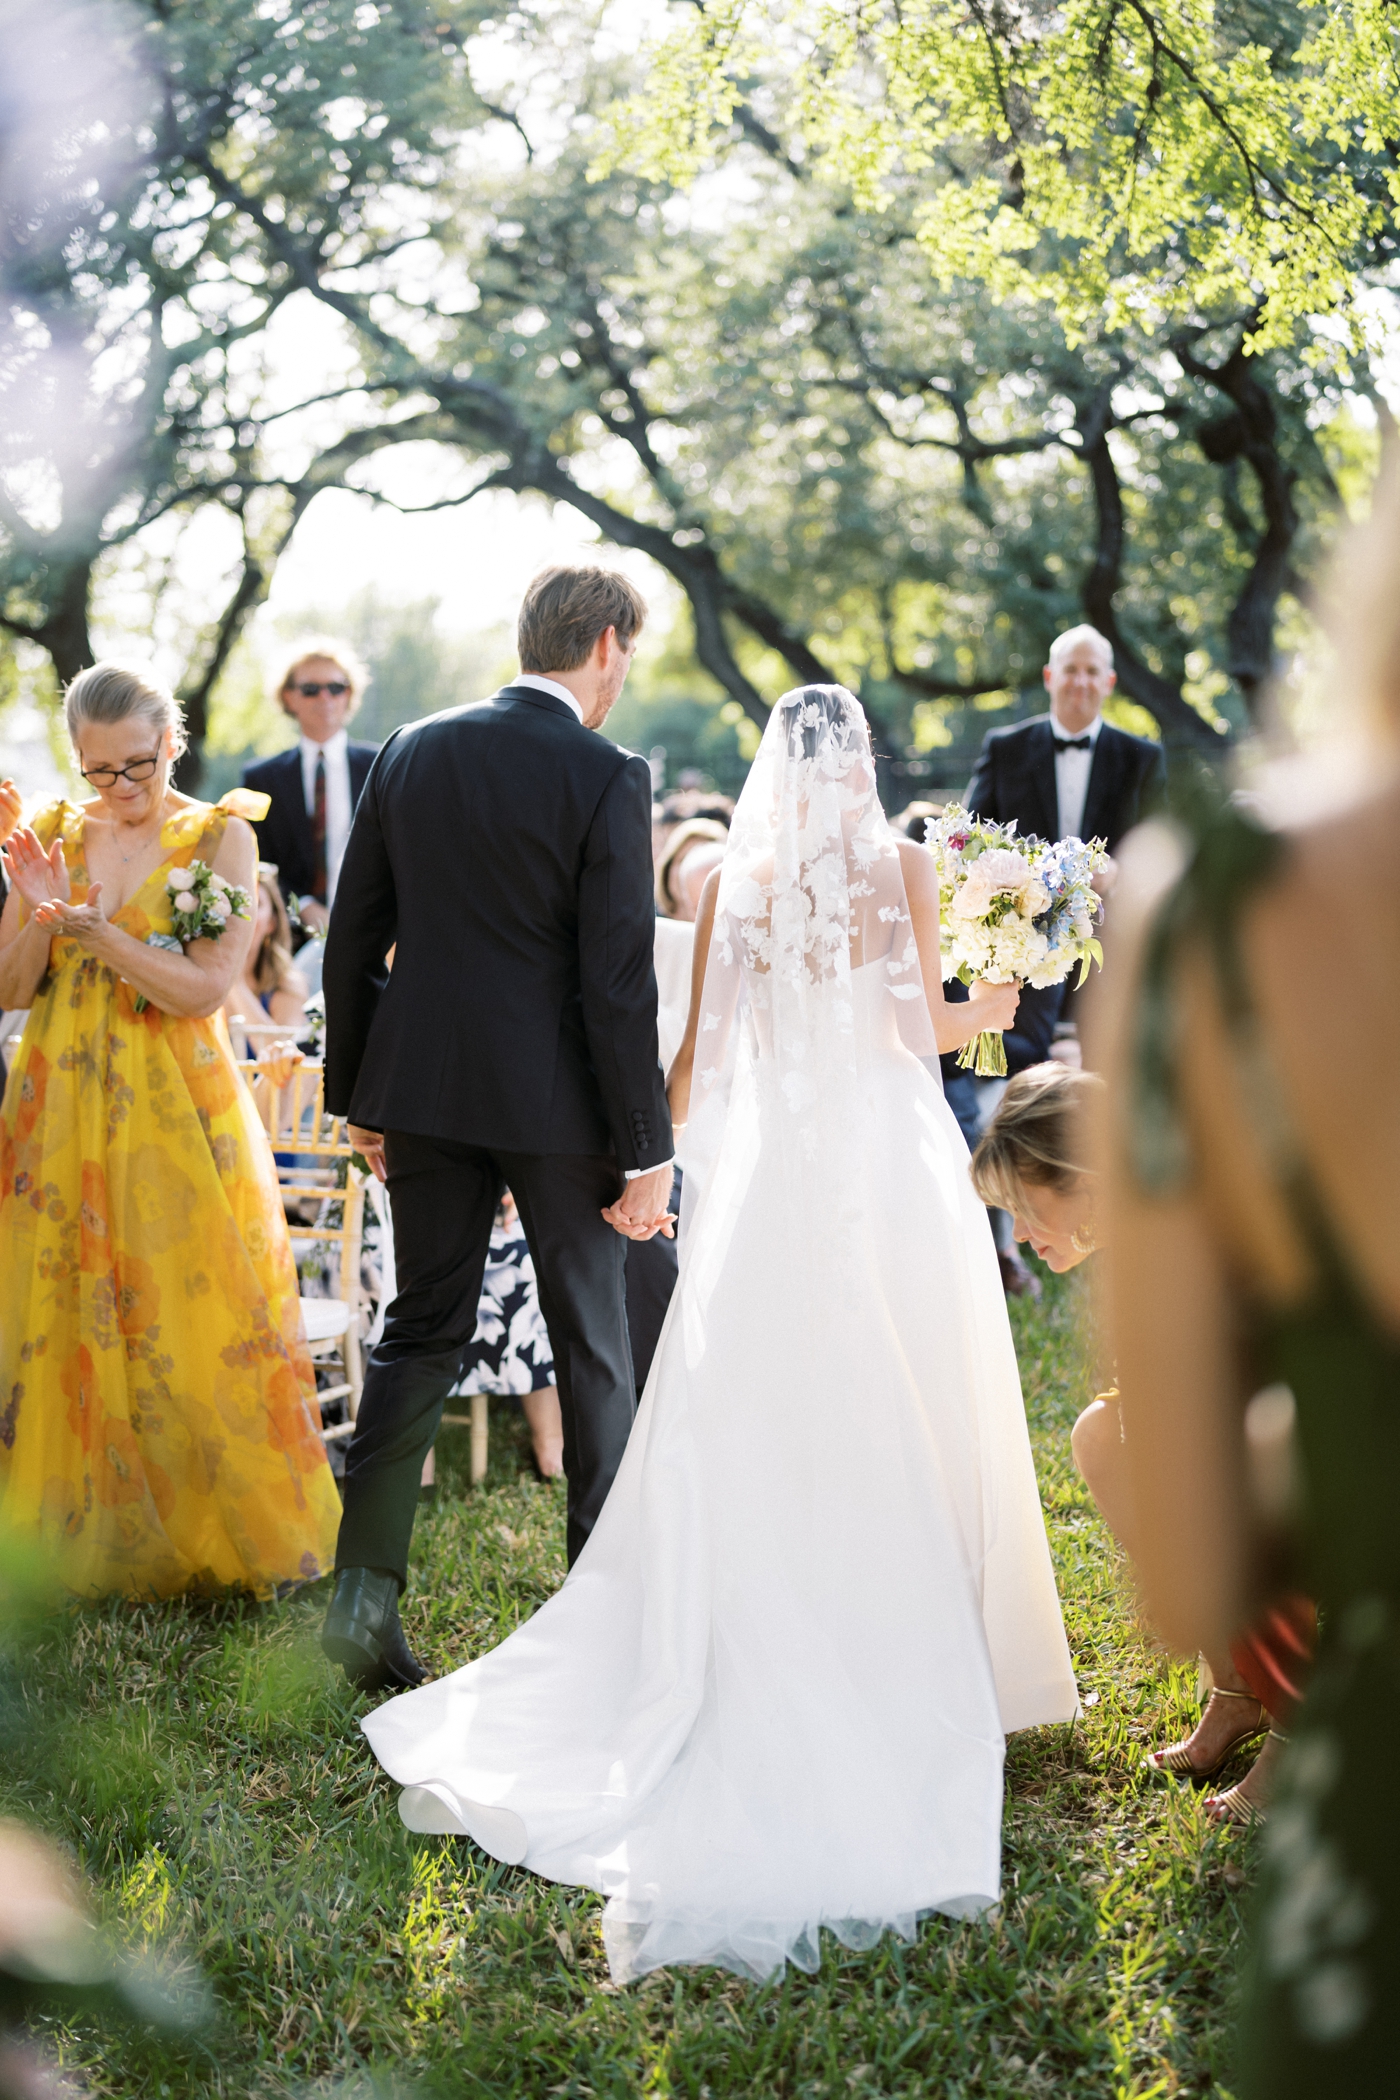 Outdoor wedding ceremony at Tarry House in Austin, Texas